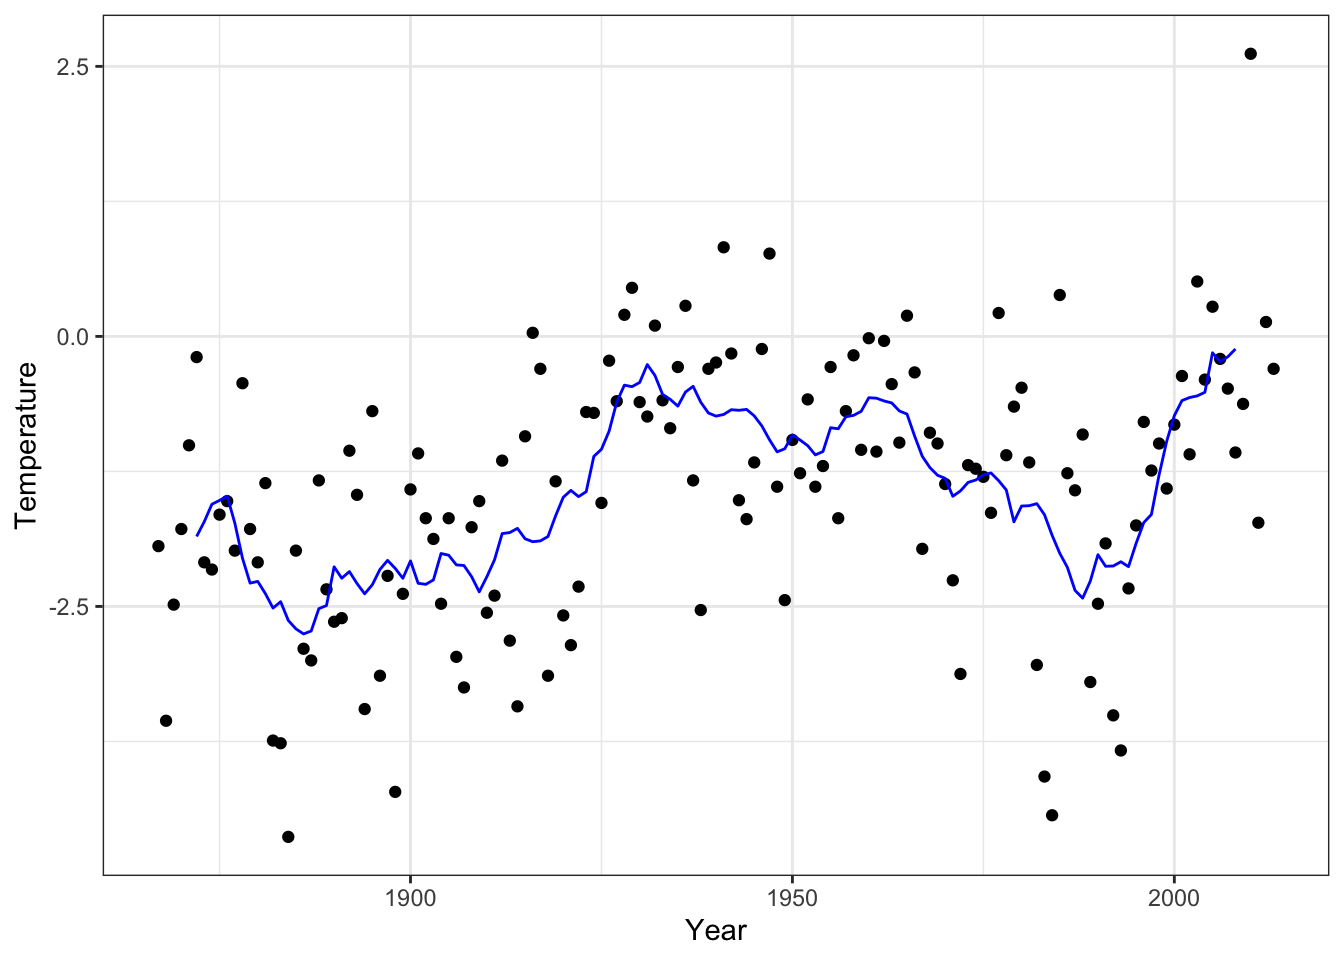 Annual average temperature in Nuuk smoothed using the running mean with $k = 11$ neighbors.